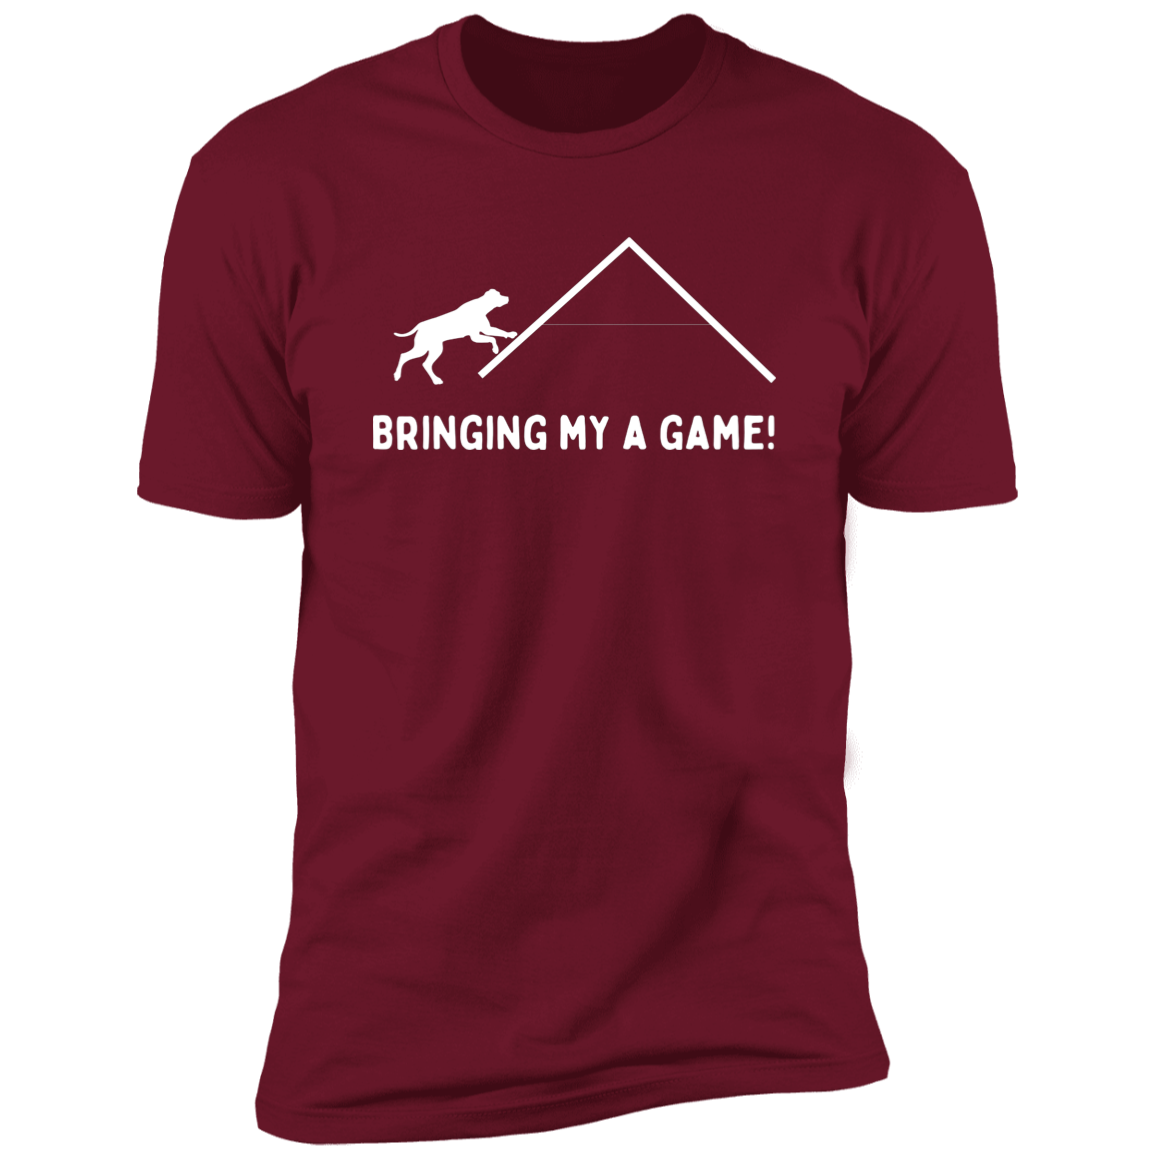 Bringing My A Game Agility T-shirt, Dog Agility Shirt for humans, in cardinal red